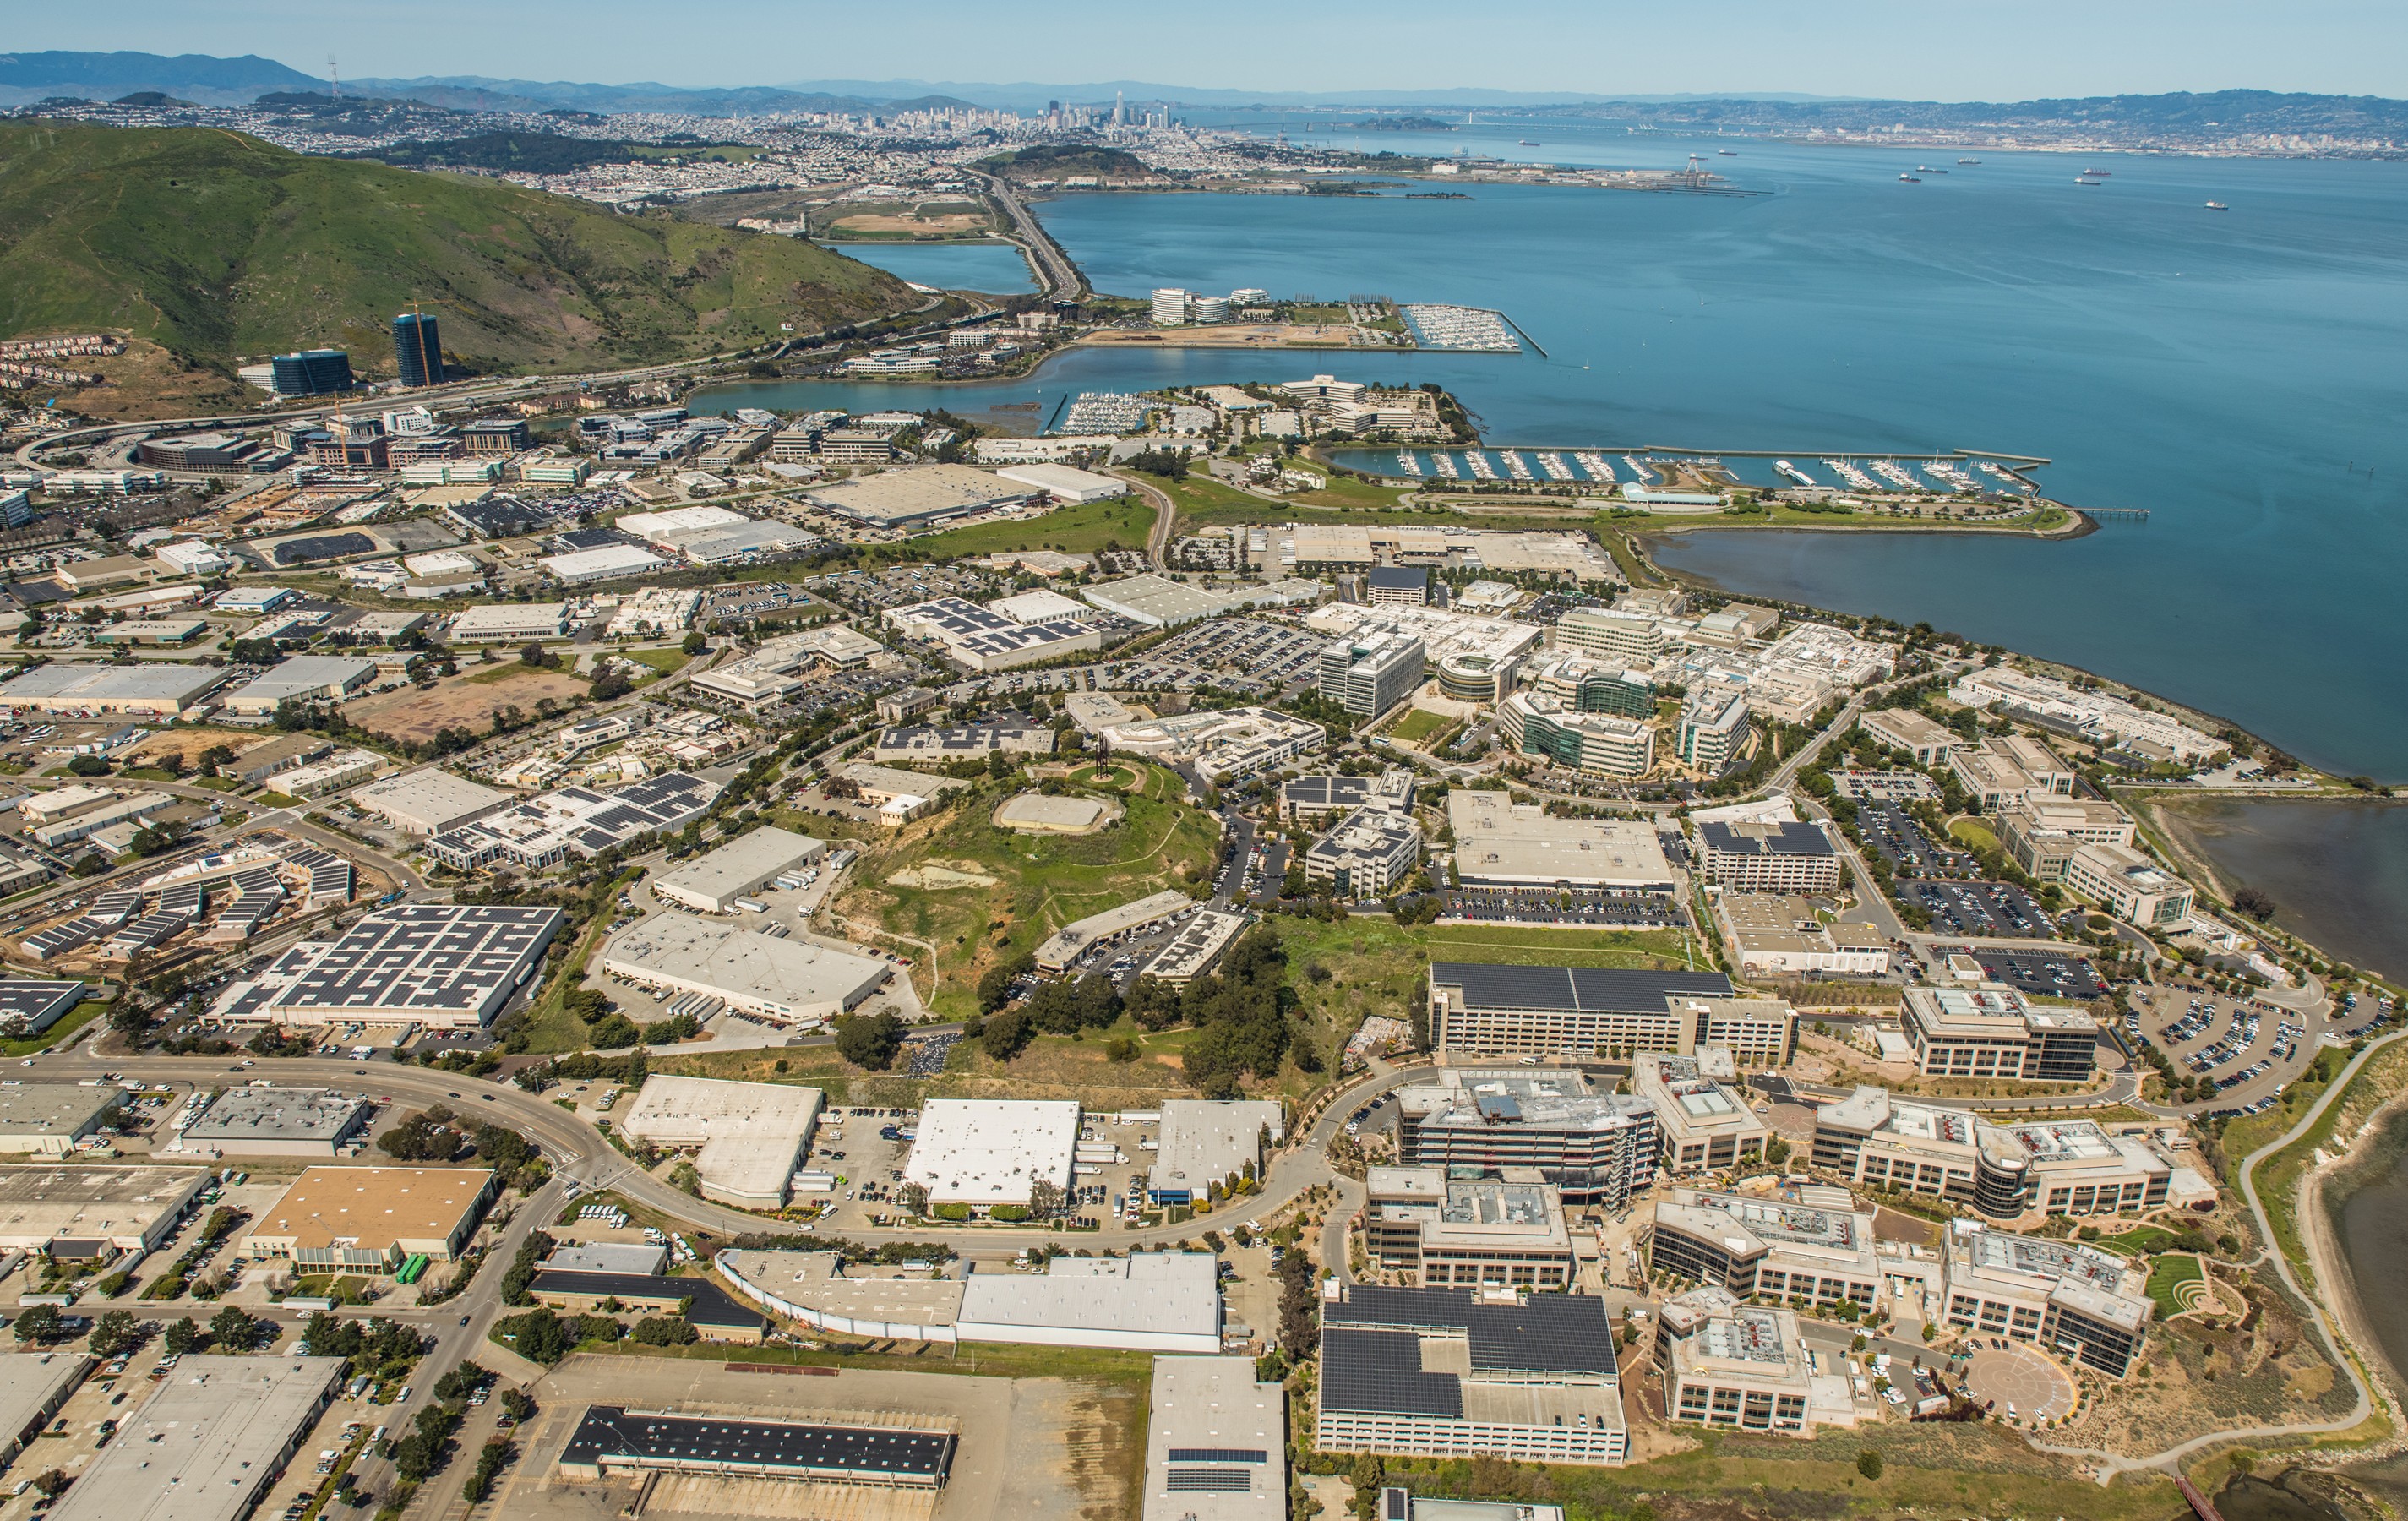 Genentech Our Next Chapter in South San Francisco